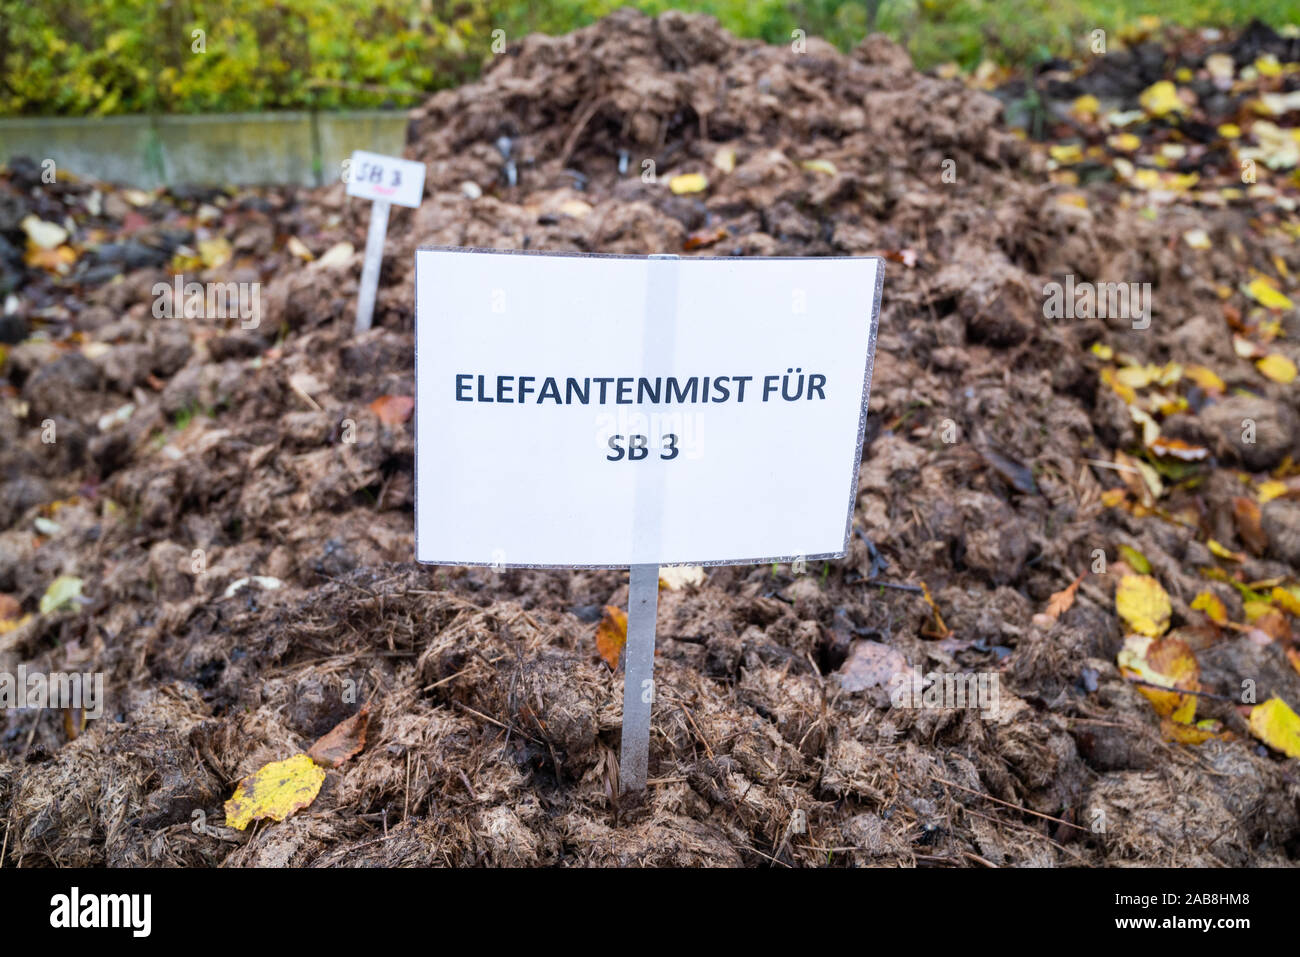 18 November 2019 Berlin In The Botanical Garden There Is A Heap